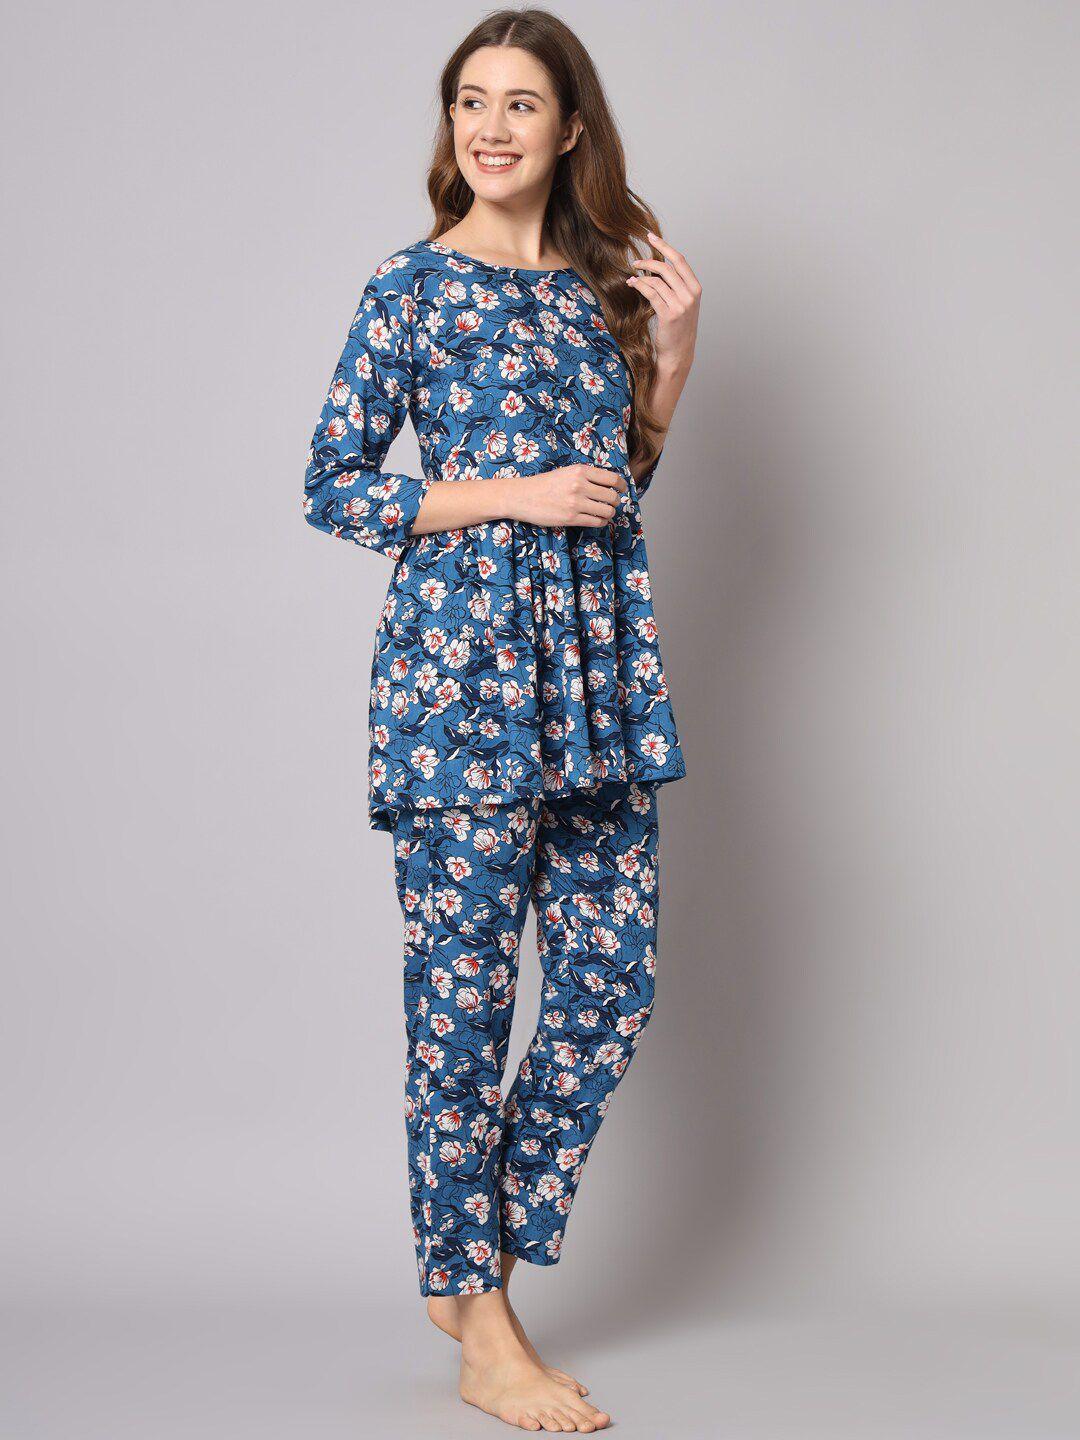 kalini floral printed pure cotton night suit